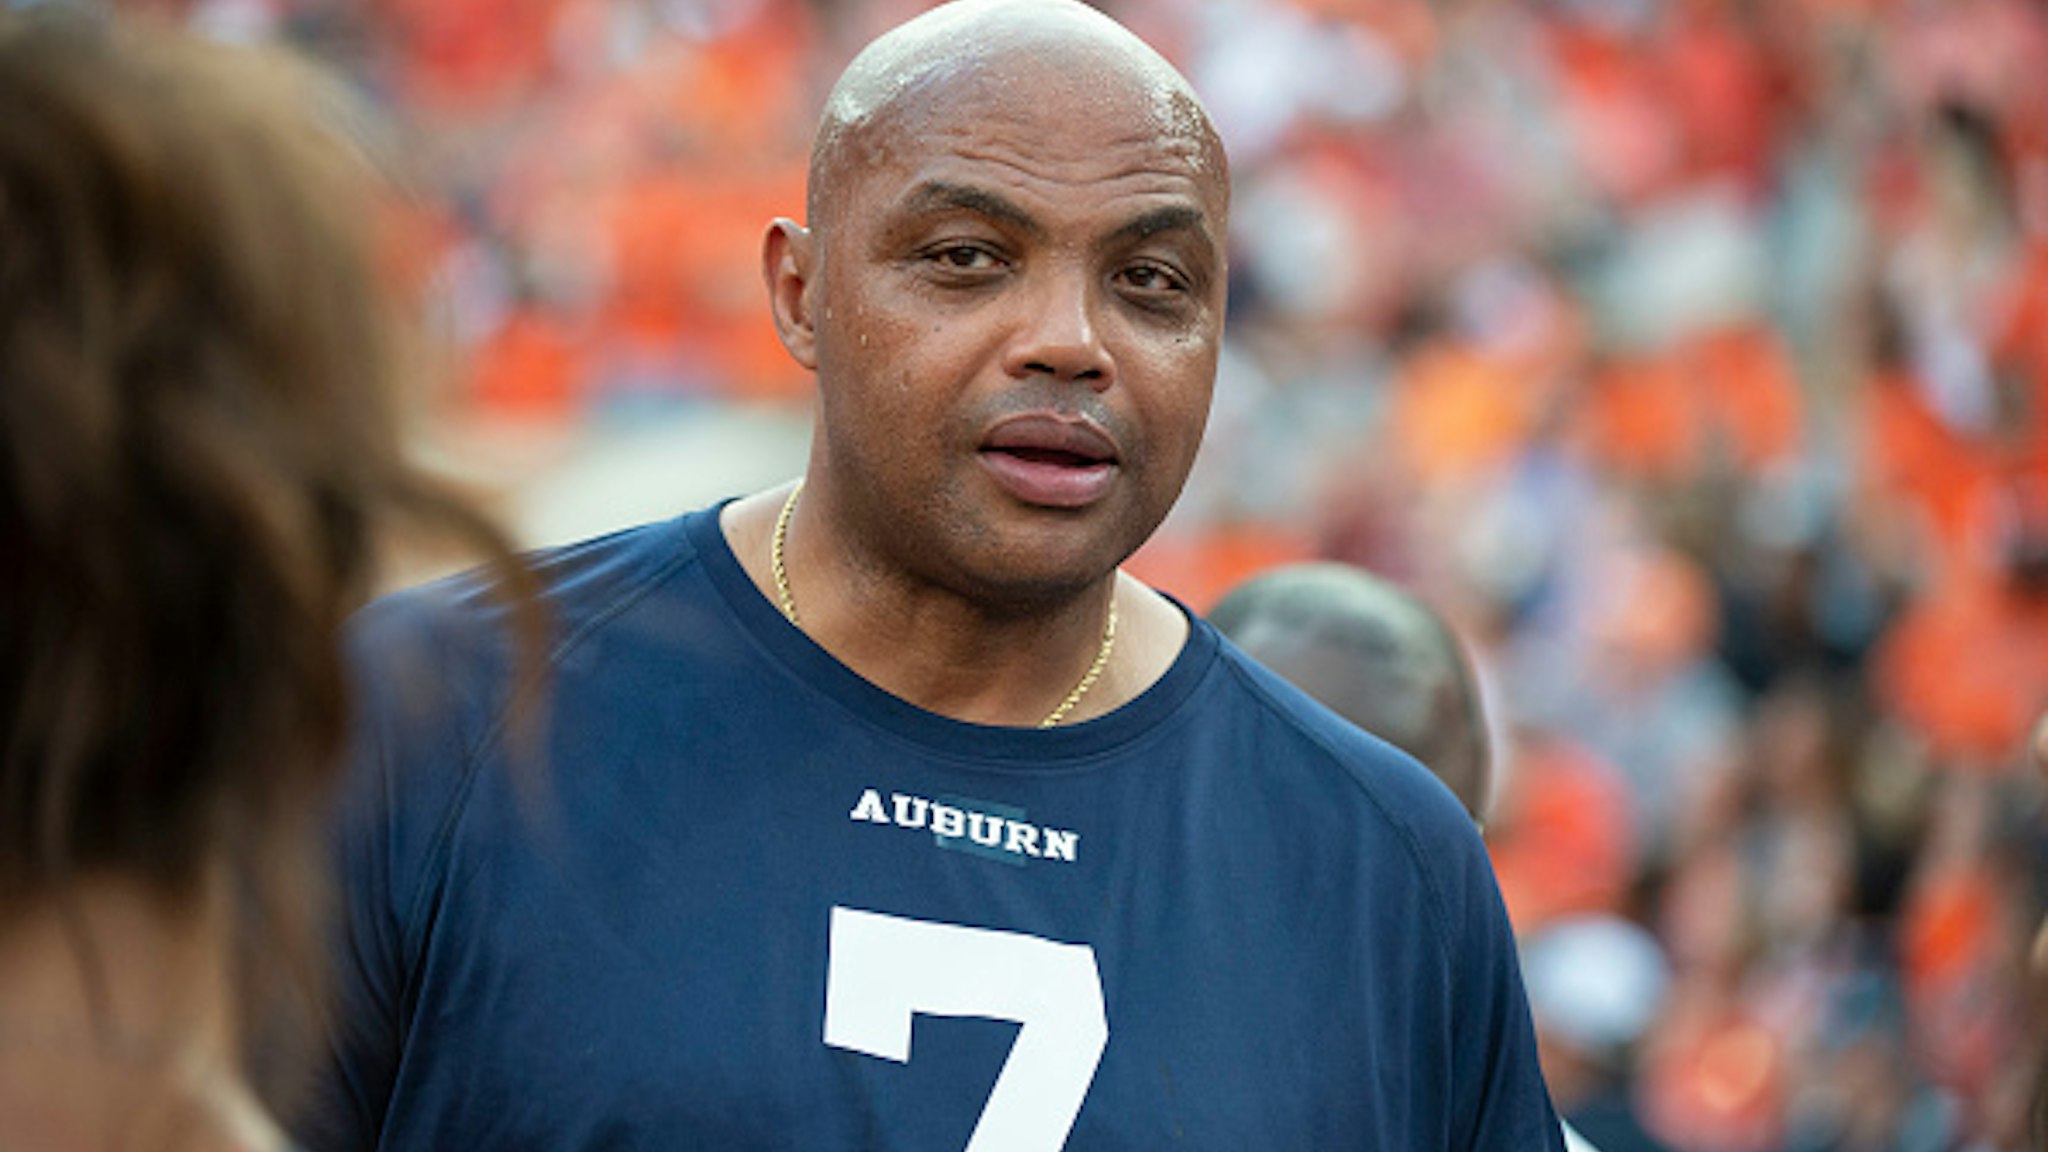 AUBURN, AL - SEPTEMBER 28: Charles Barkley talks with fans prior to the matchup between the Auburn Tigers and the Mississippi State Bulldogs at Jordan-Hare Stadium on September 28, 2019 in Auburn, AL